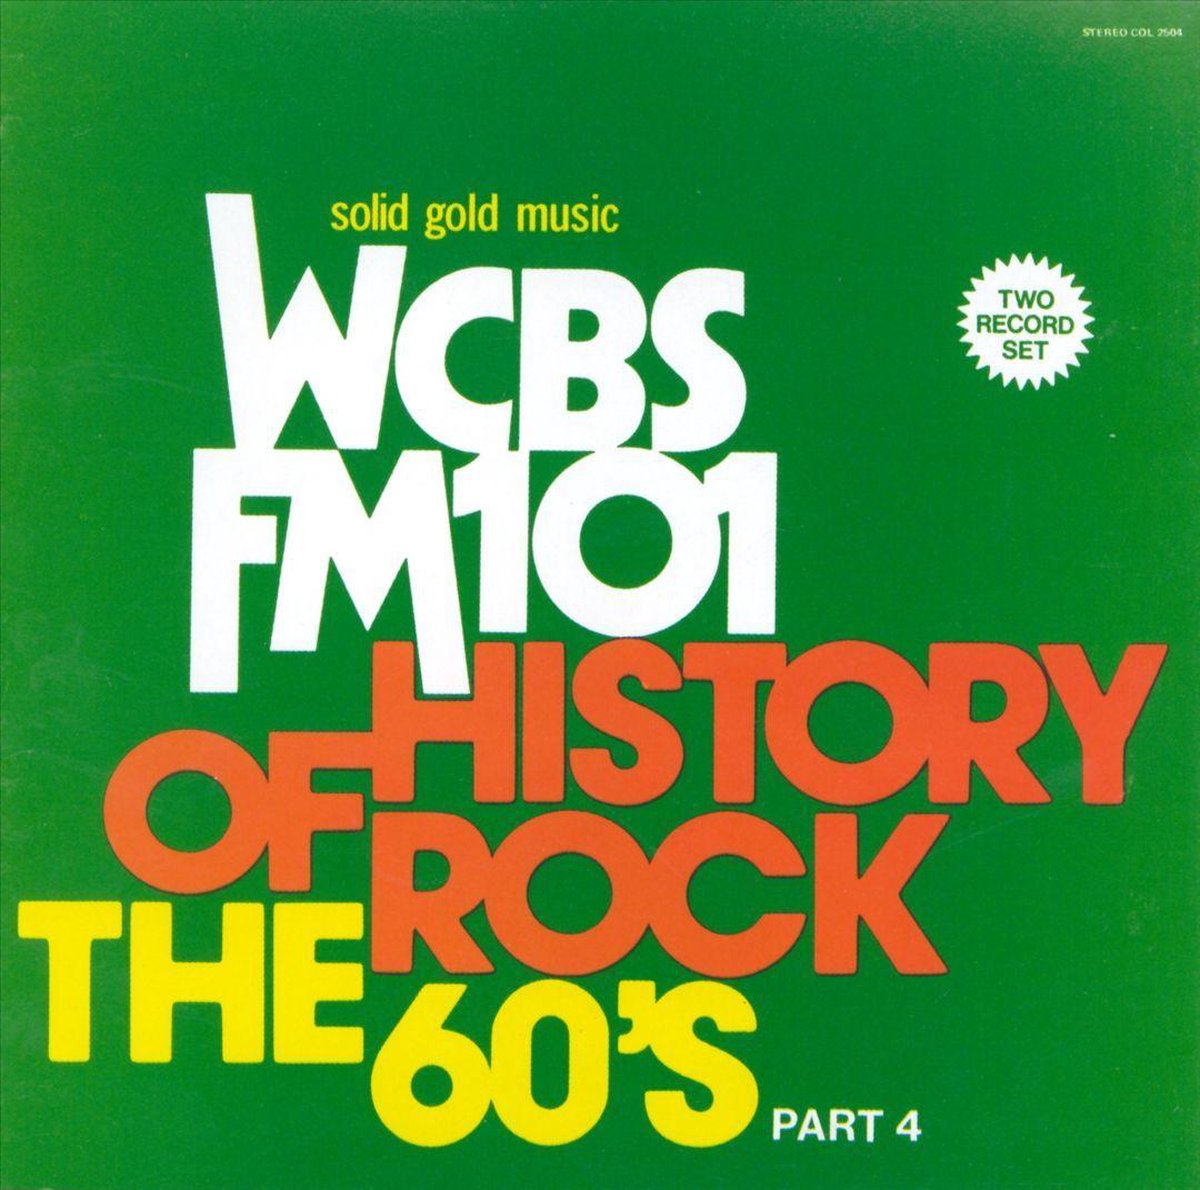 WCBS FM-101 History Of Rock/The 60's Pt. 4 - various artists